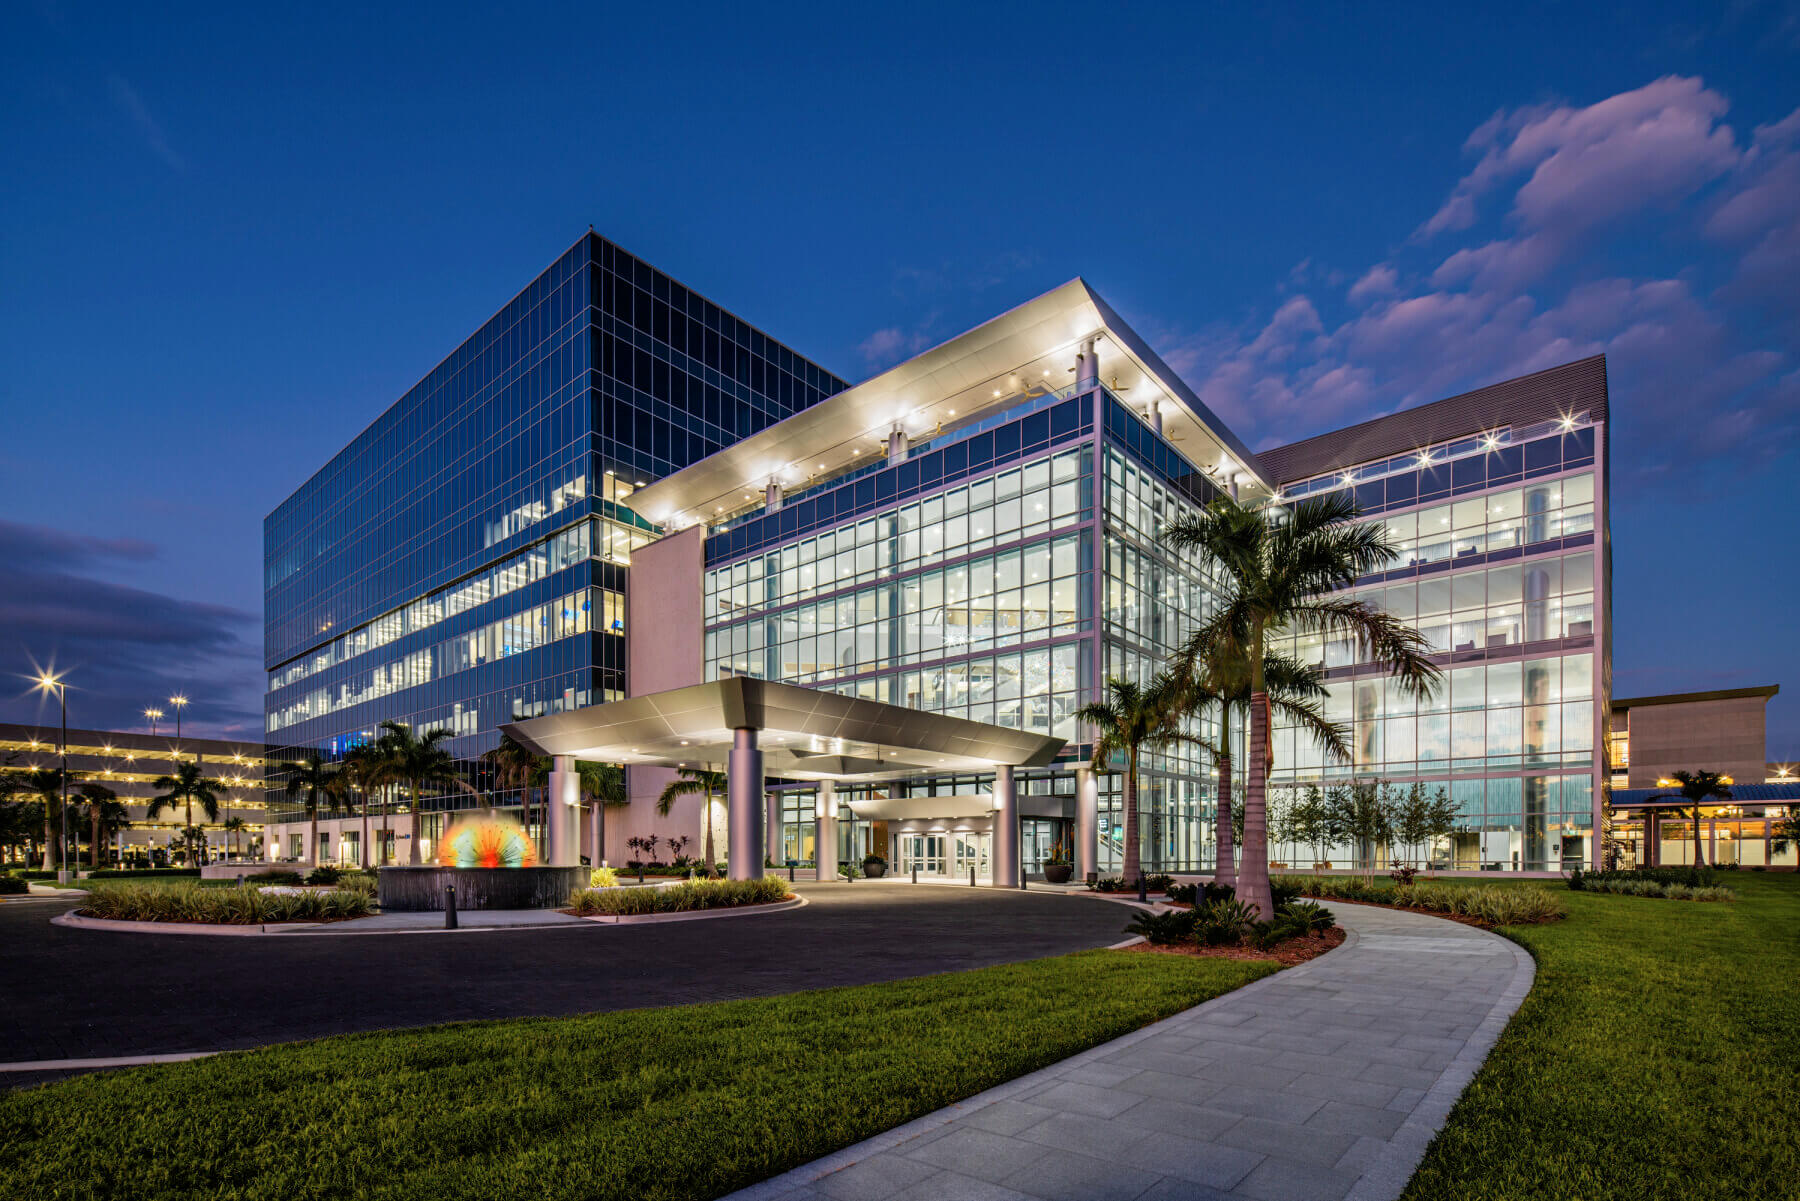 the exterior of the SkyCenter development at Tampa International Airport